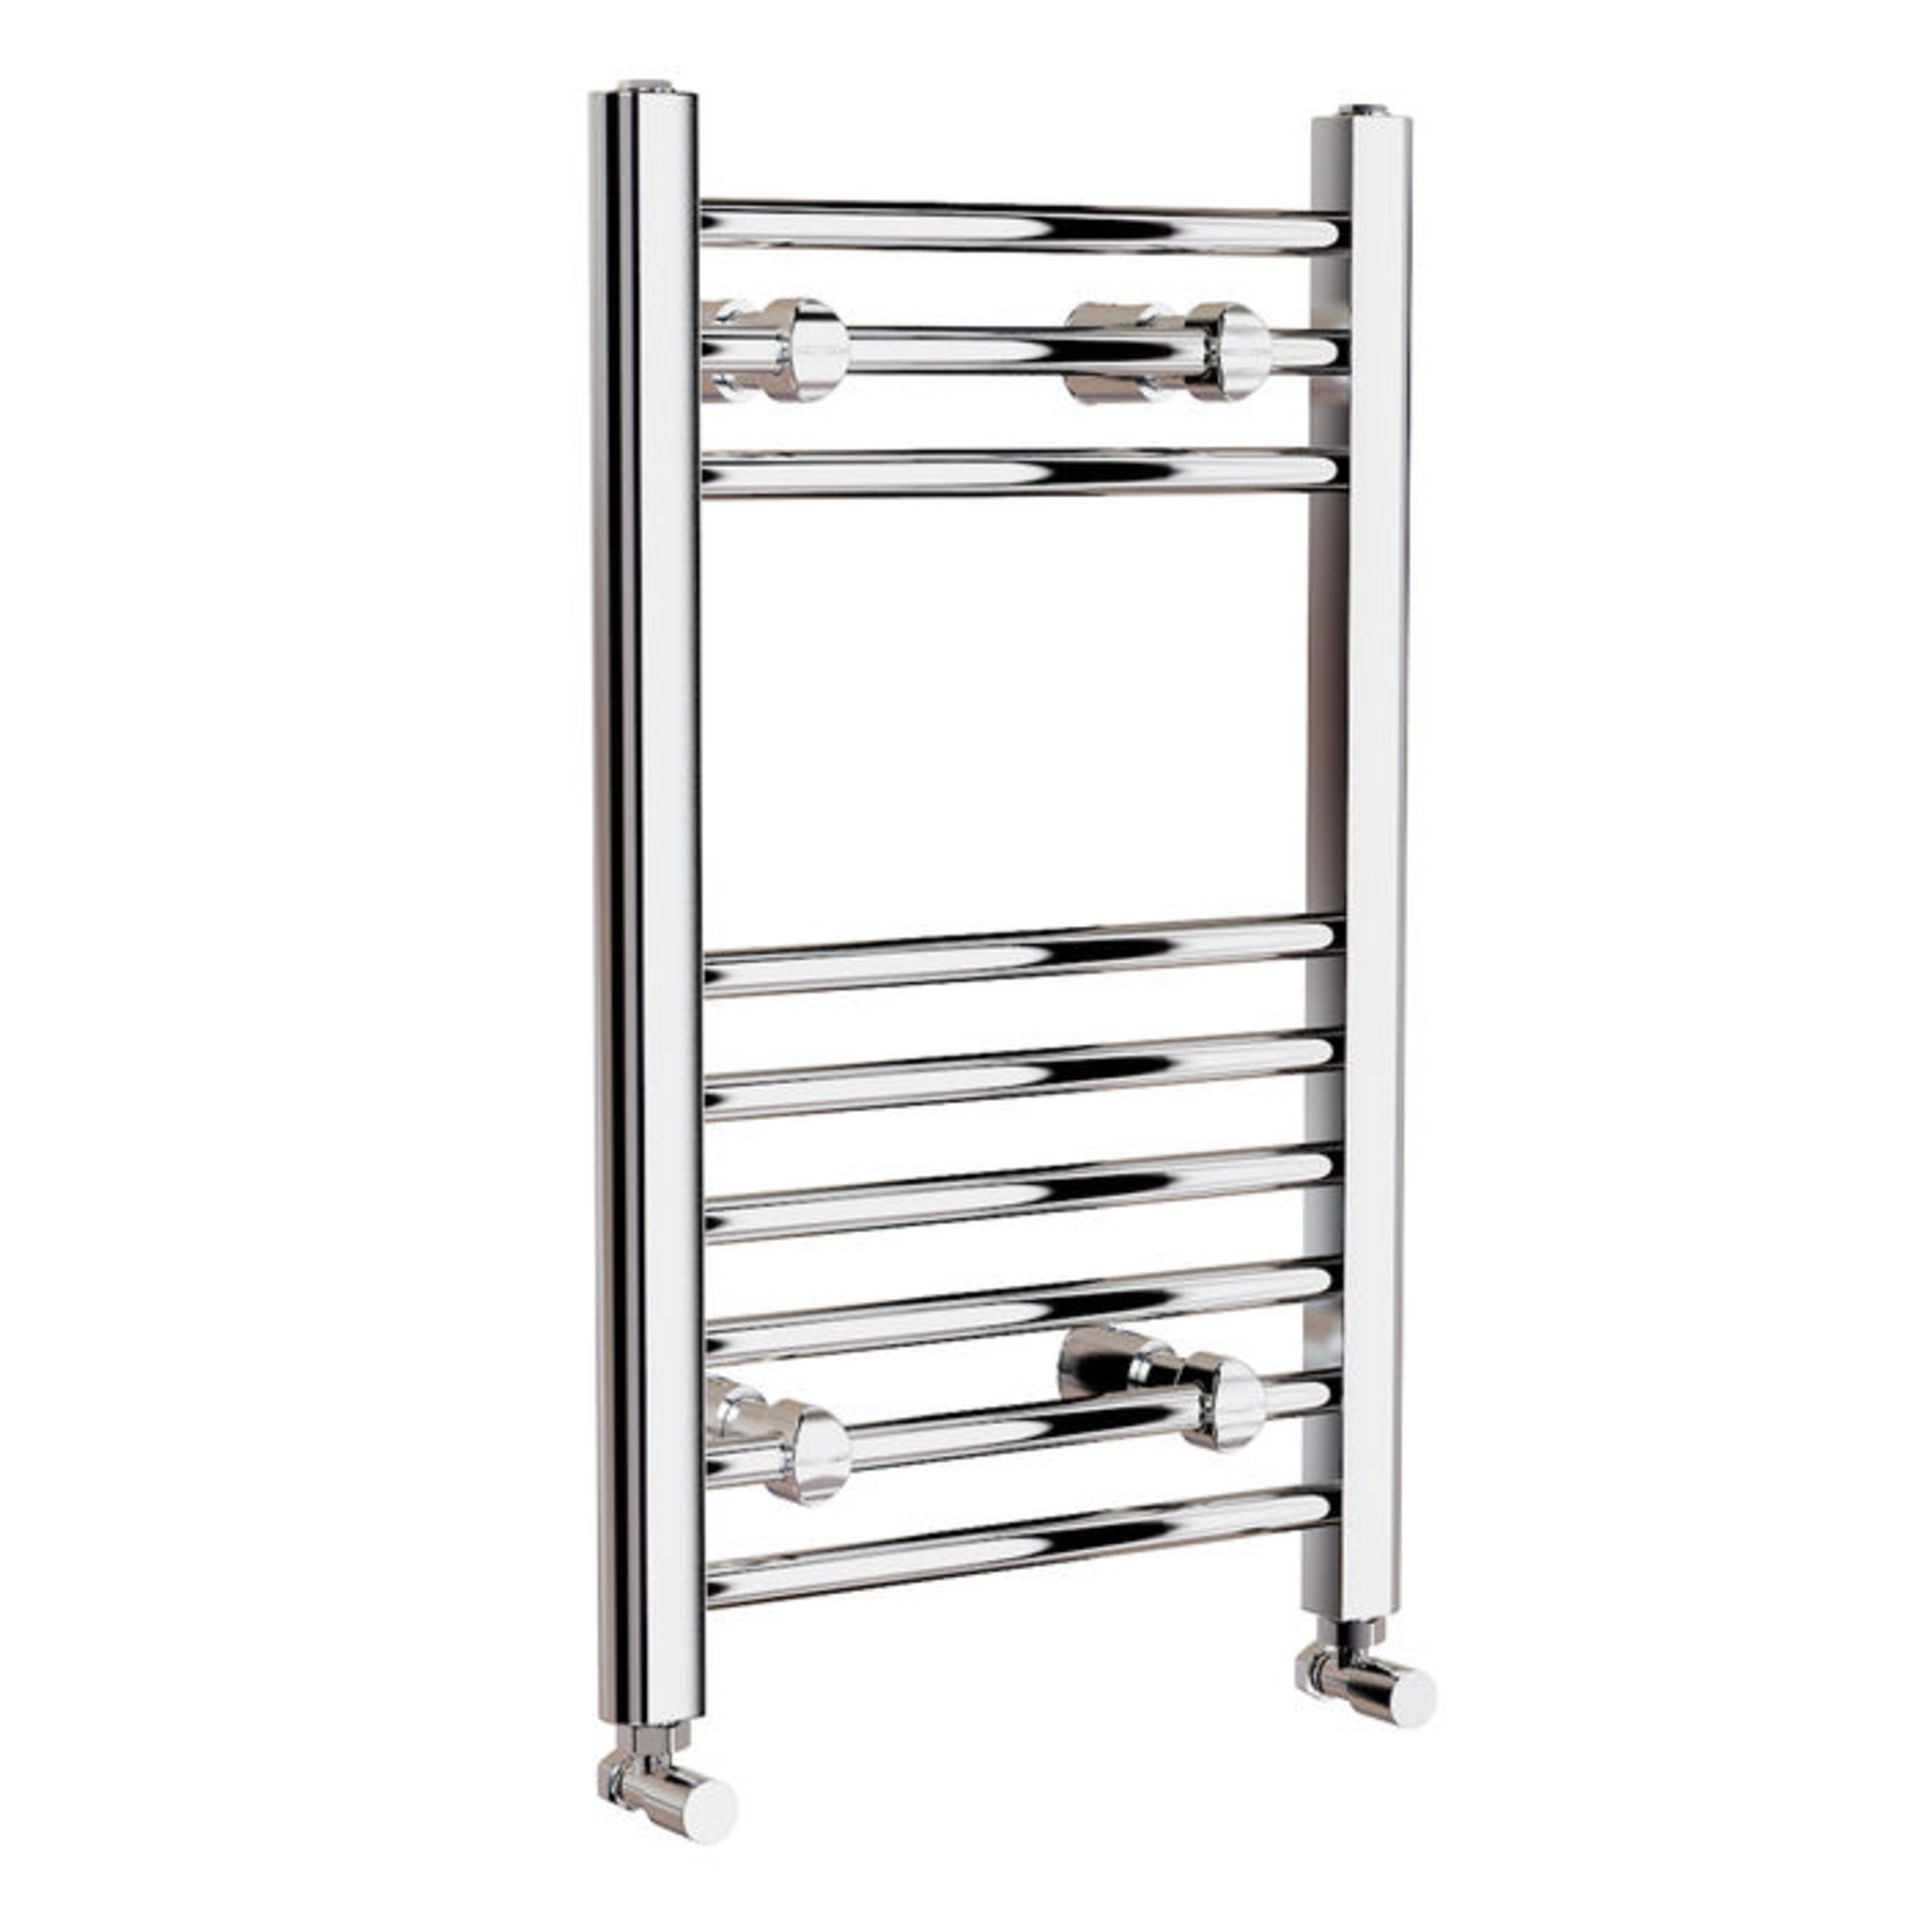 (KR201) 650x400mm Straight Heated Towel Radiator. Low carbon steel chrome plated radiator This